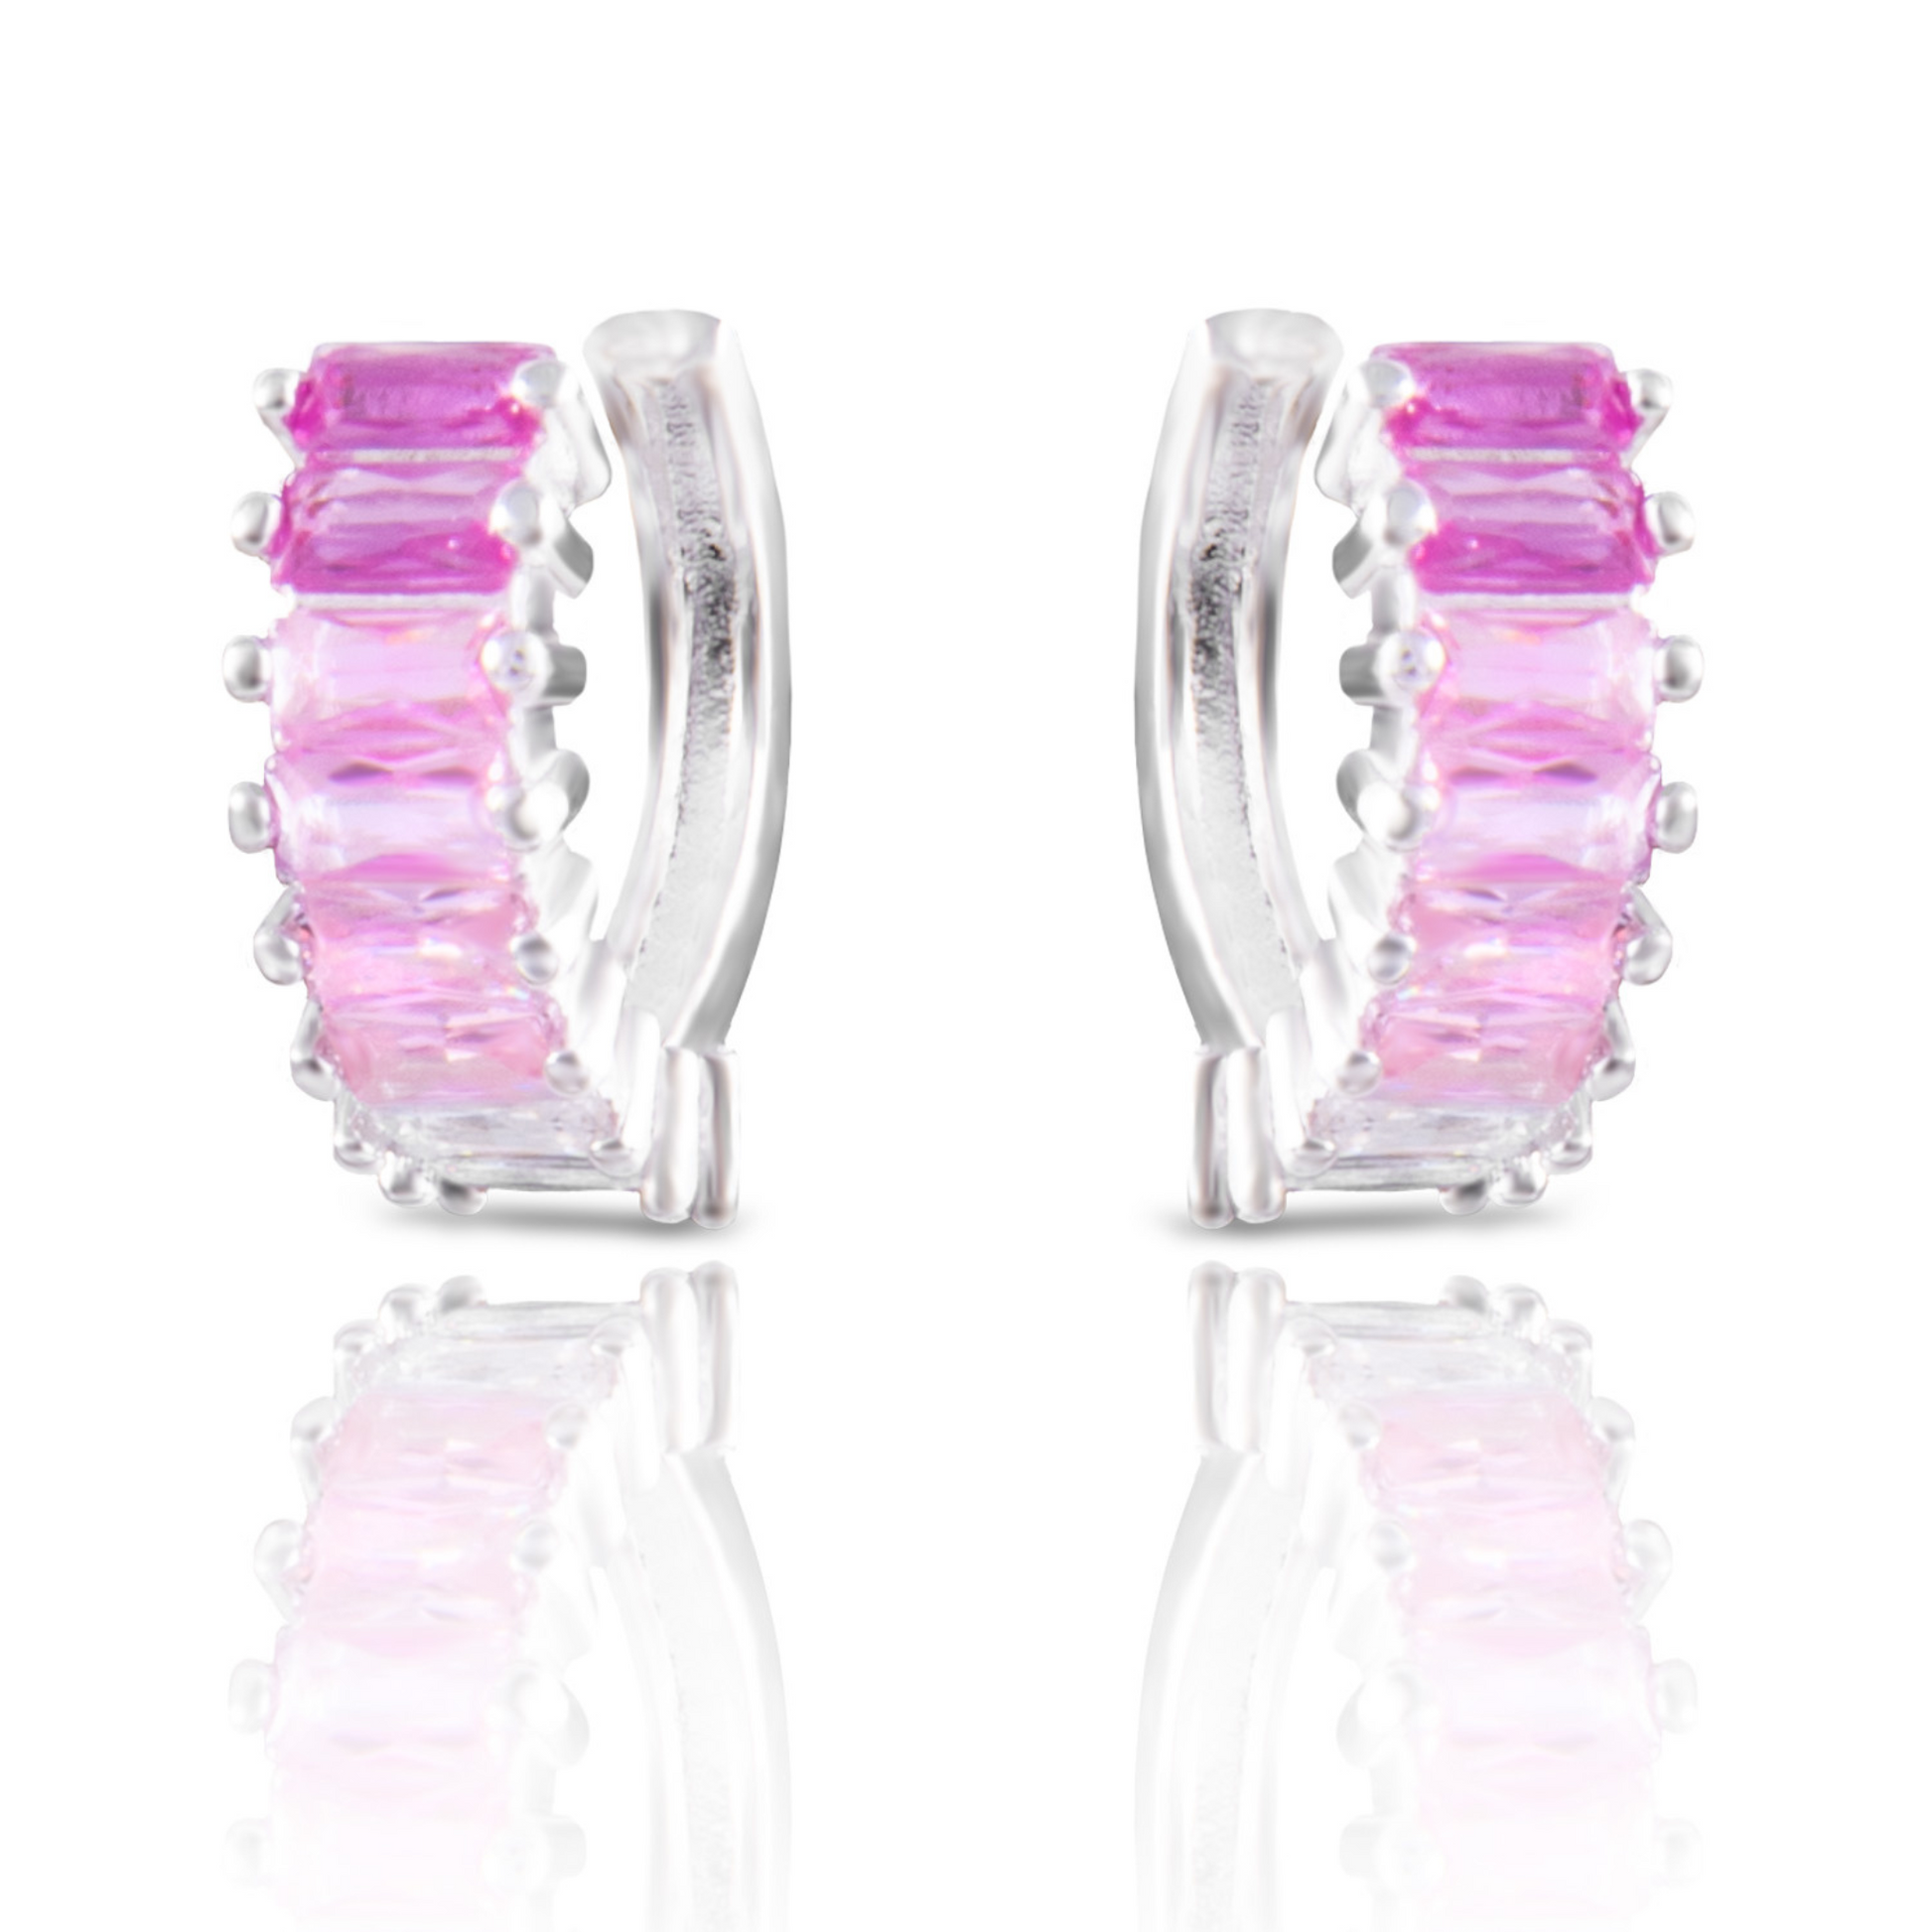 Expertly designed, these Ombre Bagette Huggie Earrings feature a stunning pink and silver ombre design. The small hoops add a touch of elegance, making them perfect for any occasion. Elevate your style with these unique, eye-catching earrings.